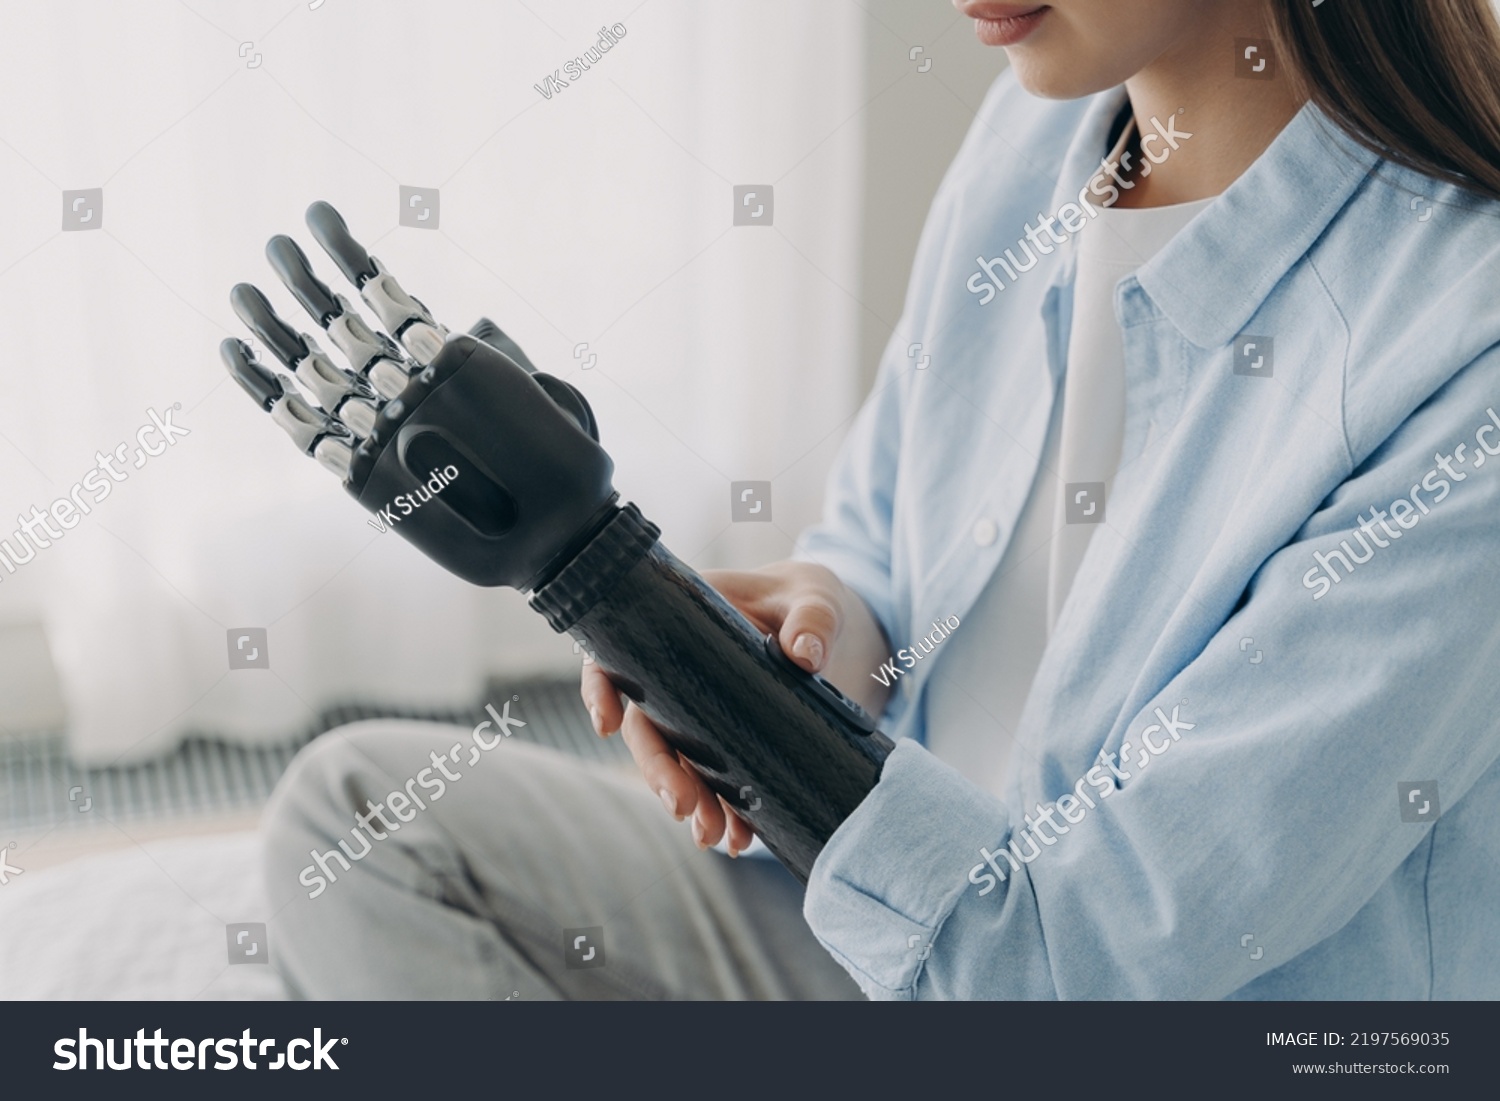 Women with disability customizing her sensory prosthetic arm, close-up. Female with disability using robotic prosthesis after limb loss. Application of bionic hands. Medical technologies. #2197569035